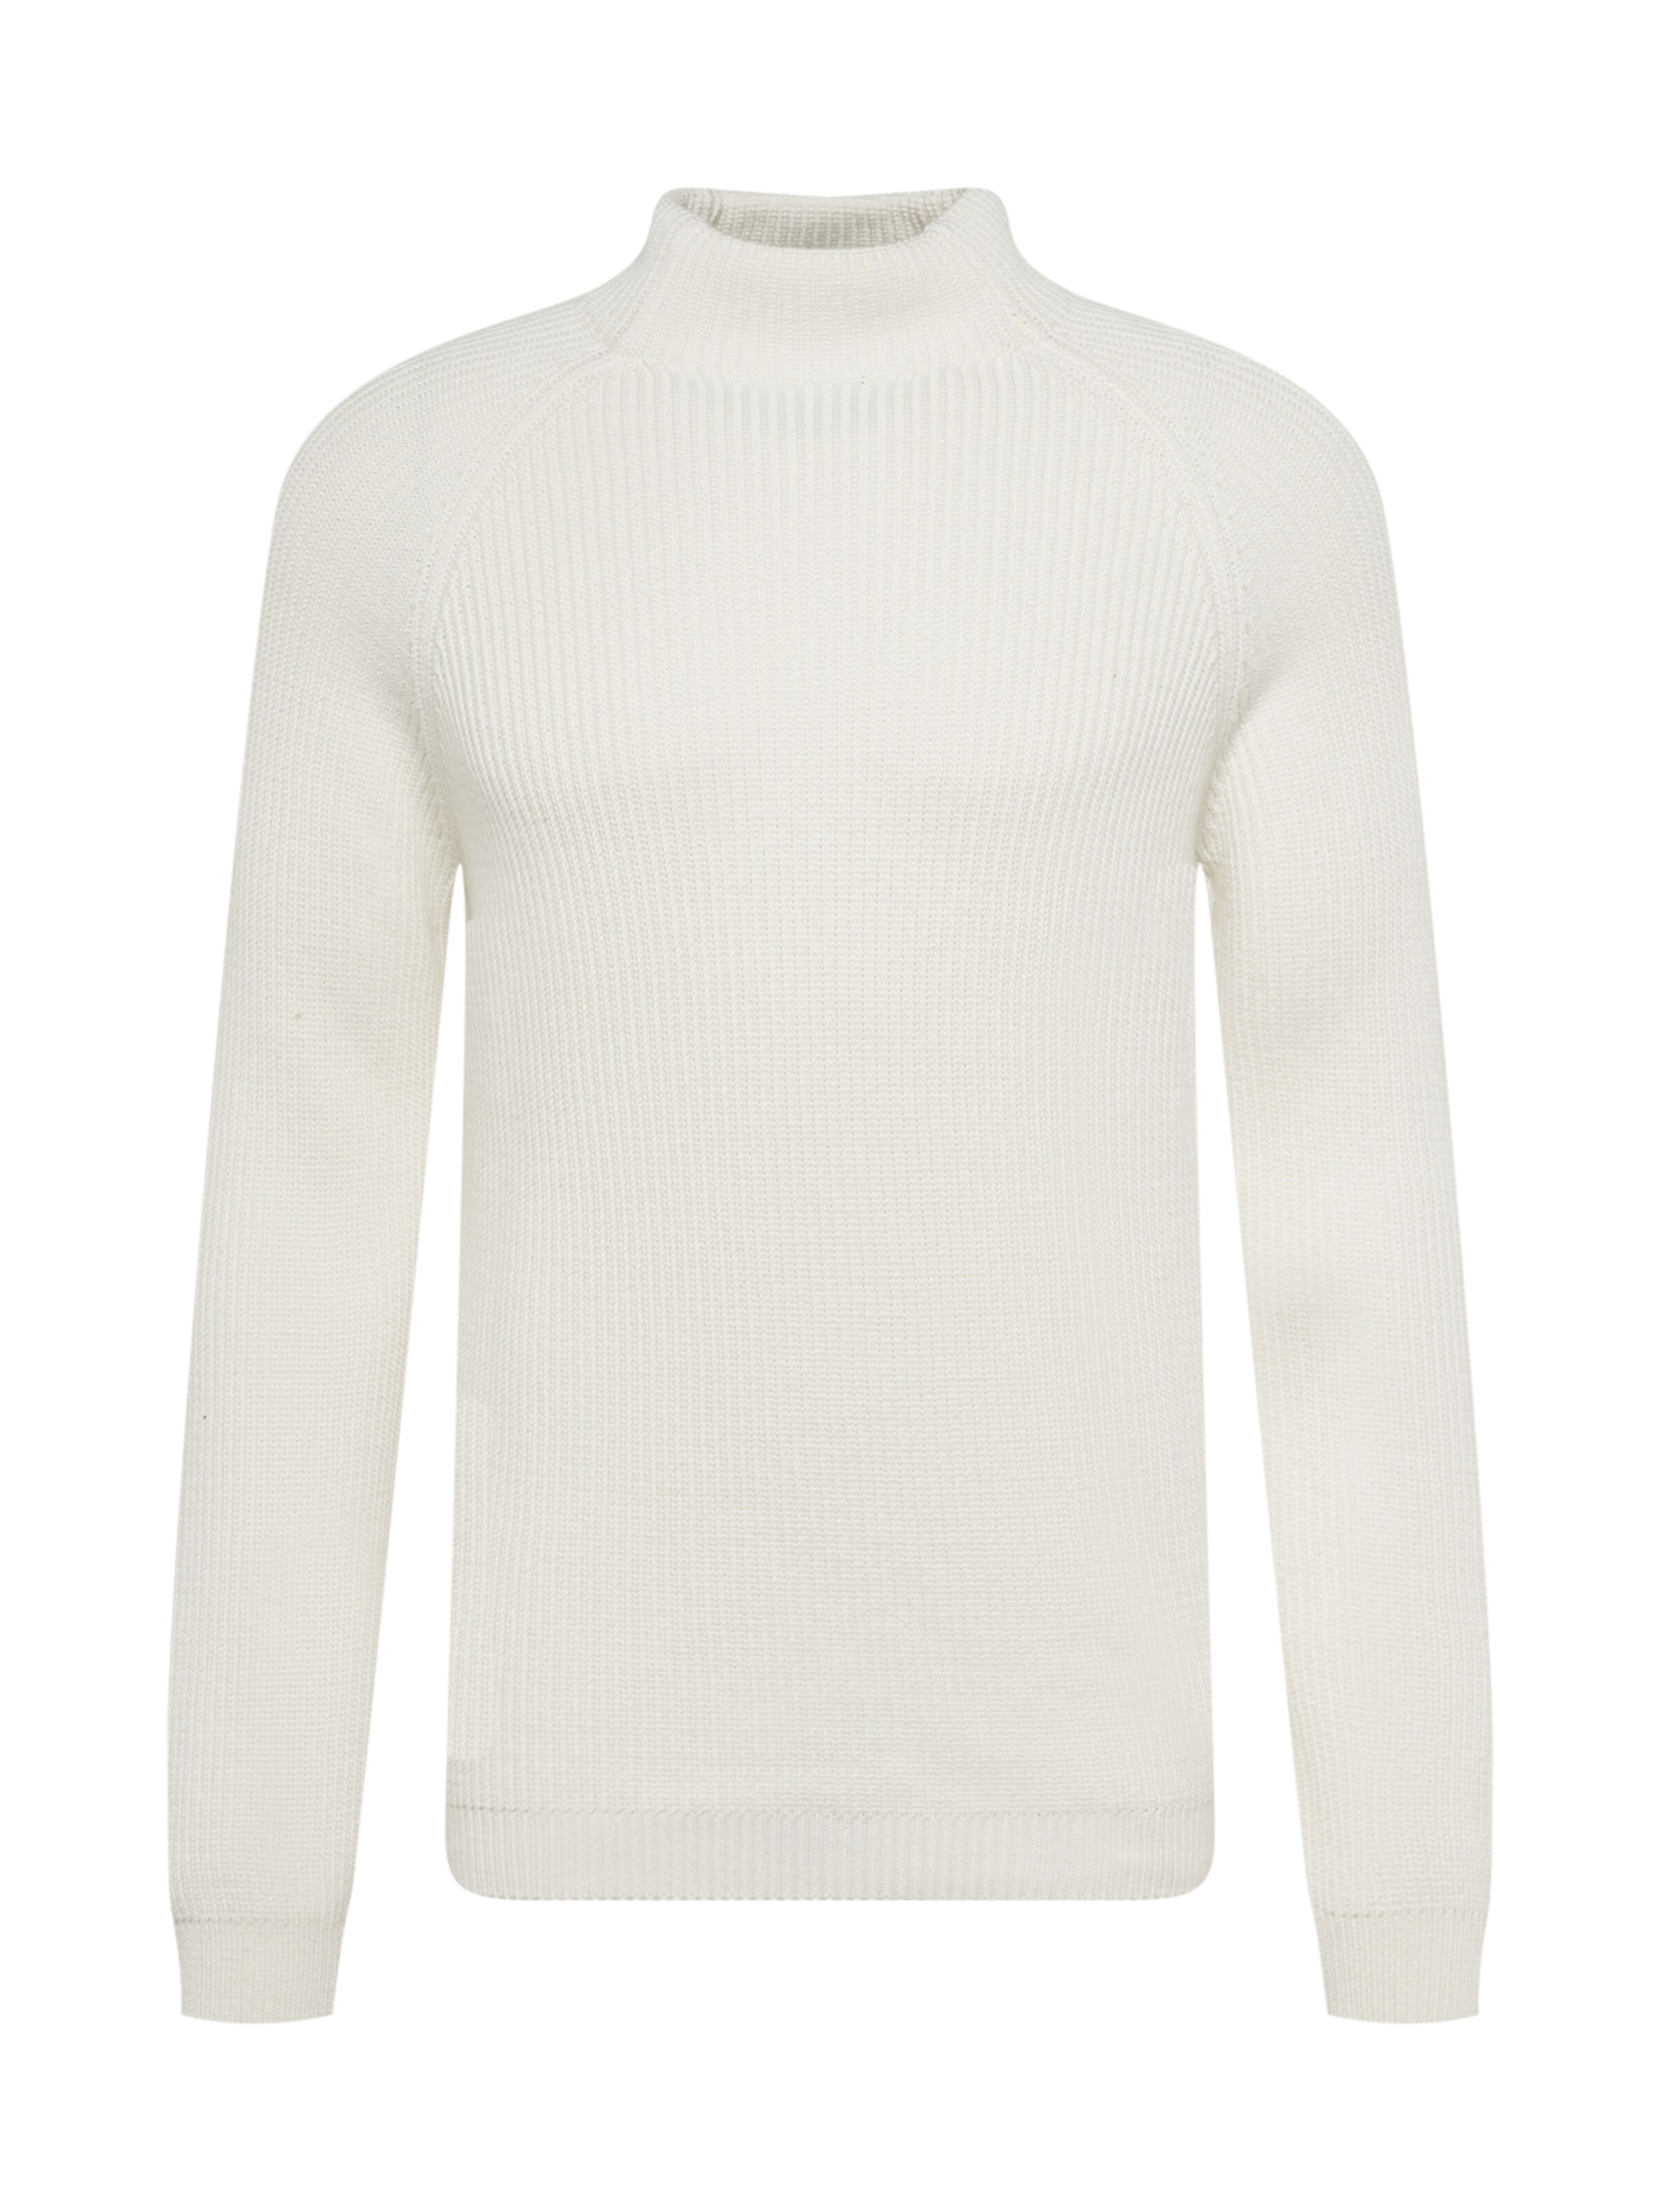 Pullover ABOUT YOU Herren Kleidung Pullover & Strickjacken Pullover Strickpullover 